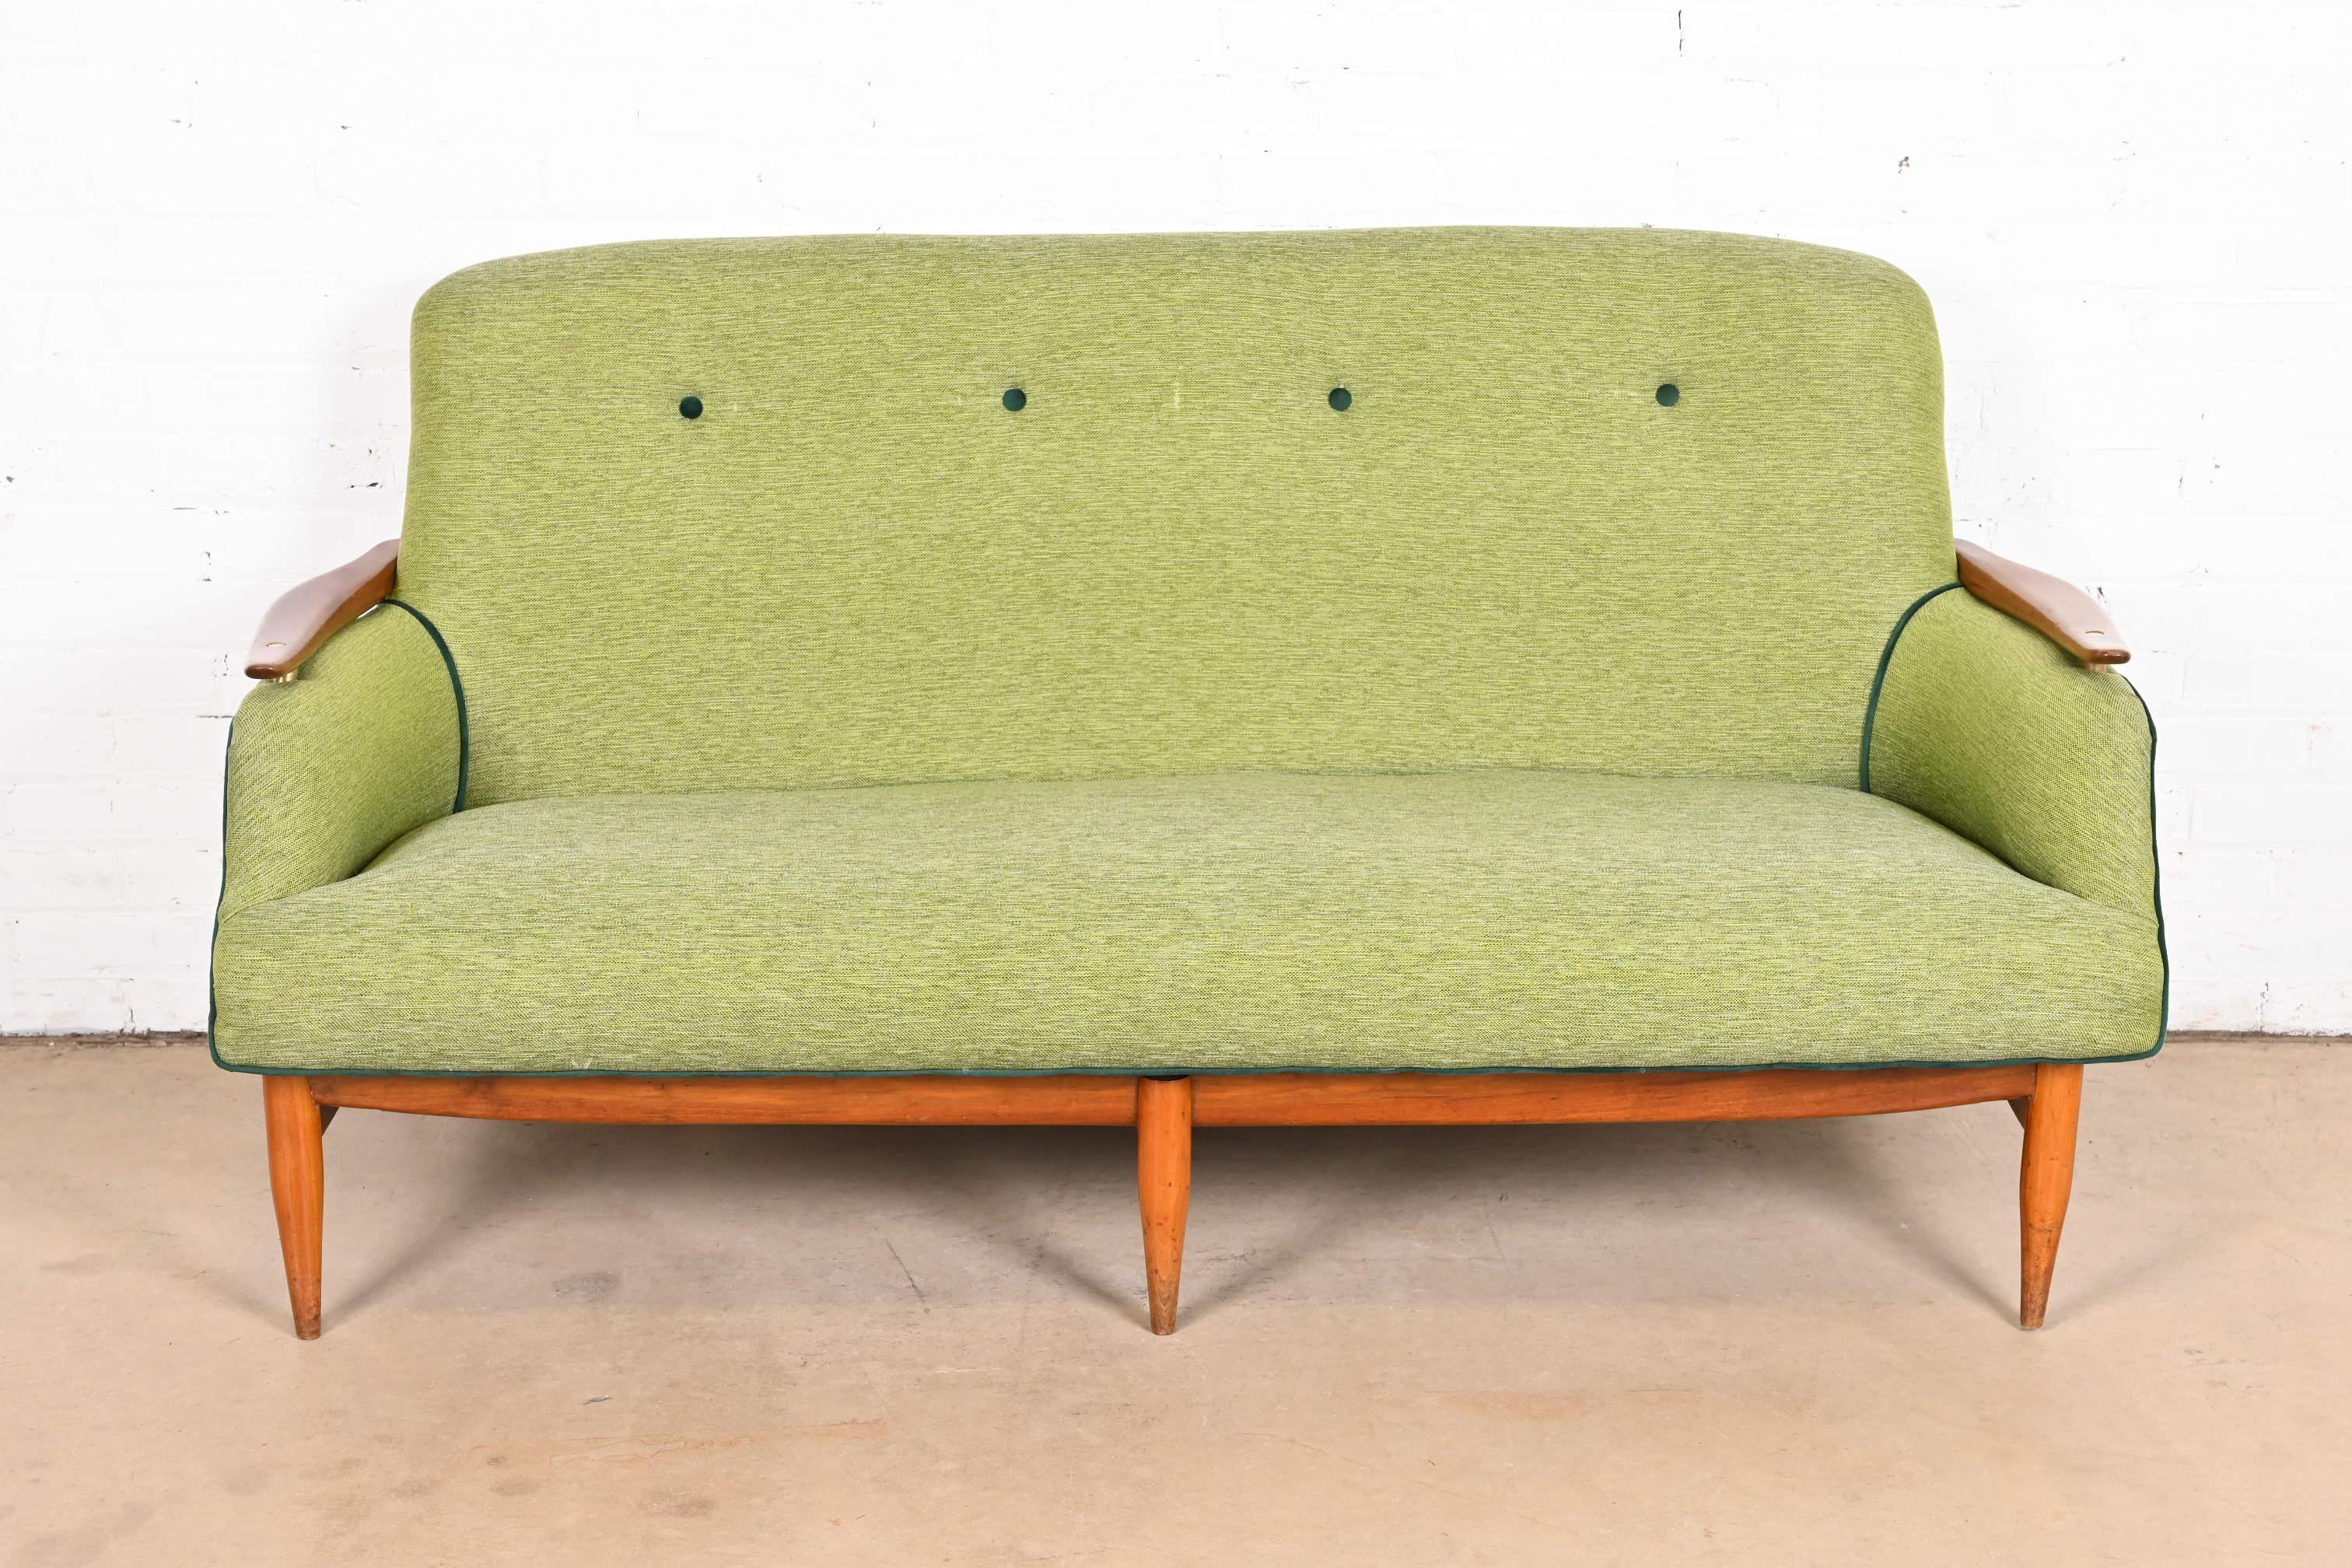 A gorgeous mid-century Danish Modern sofa

Attributed to Finn Juhl

Denmark, 1950s

Sculpted teak frame and brass accents, with green upholstered seat and tufted back.

Measures: 64